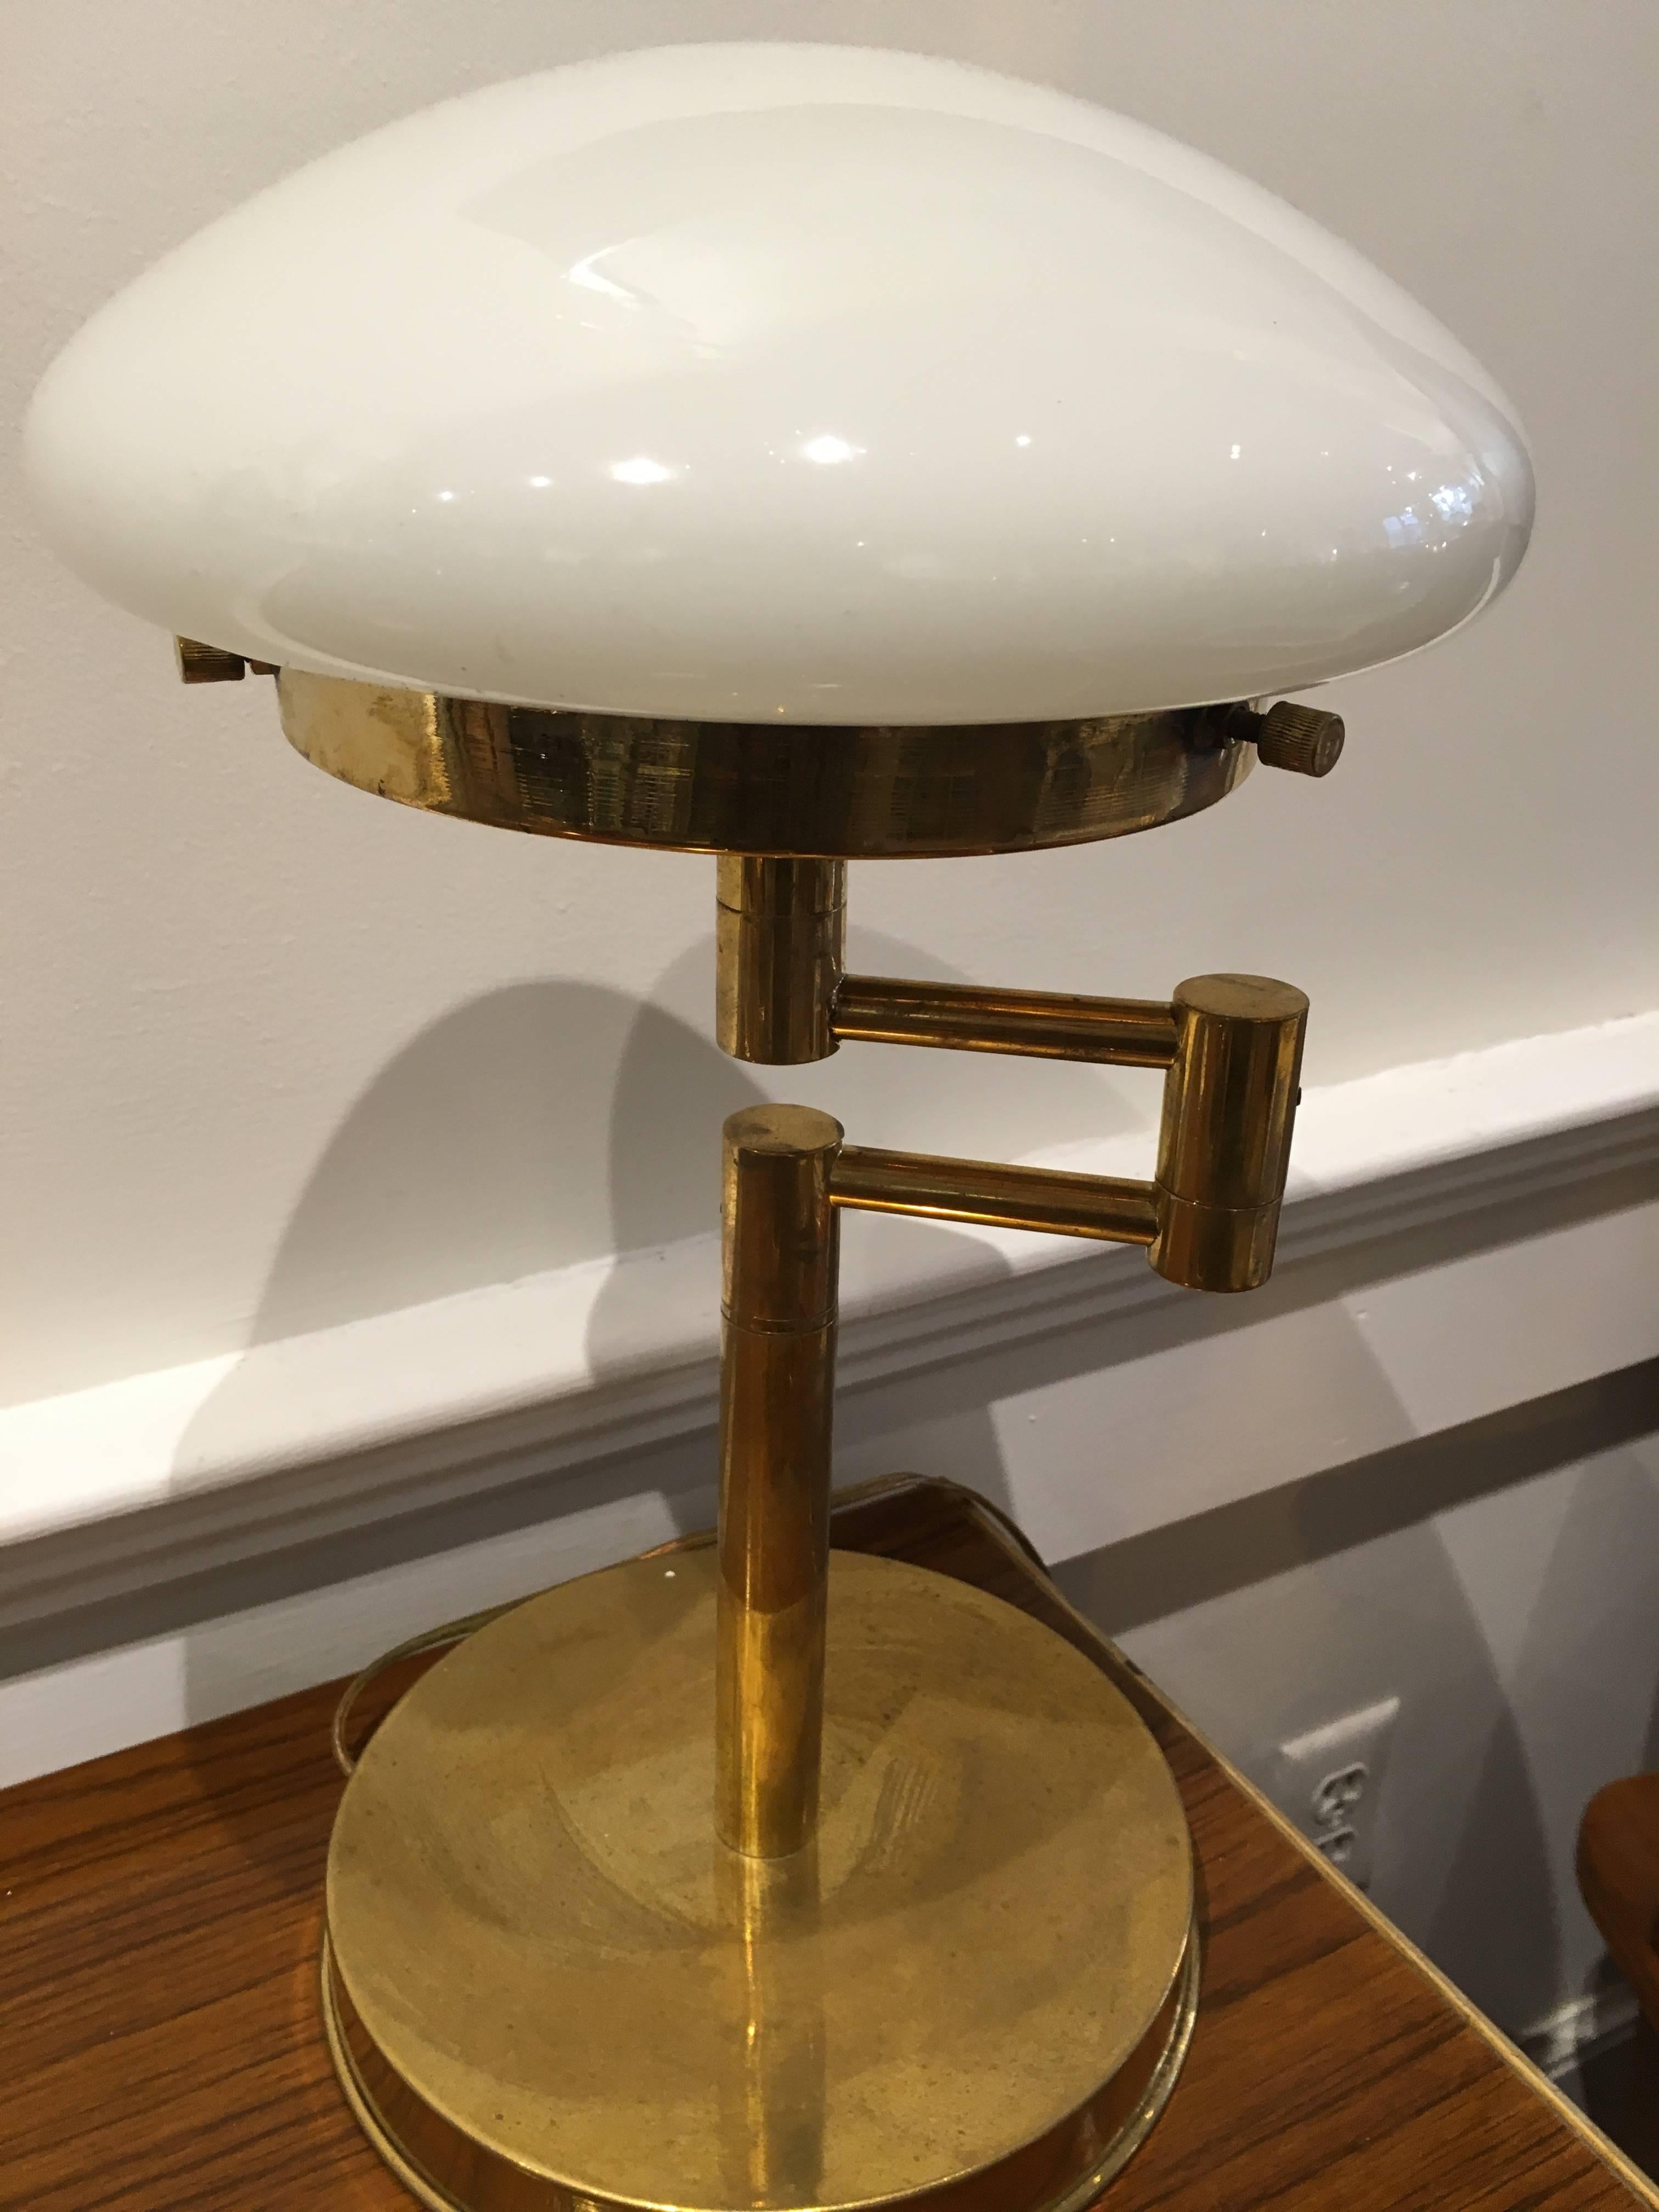 20th Century Pair of Mid-Century Modern Adjustable Brass Table Lamps with Milk Glass Shades